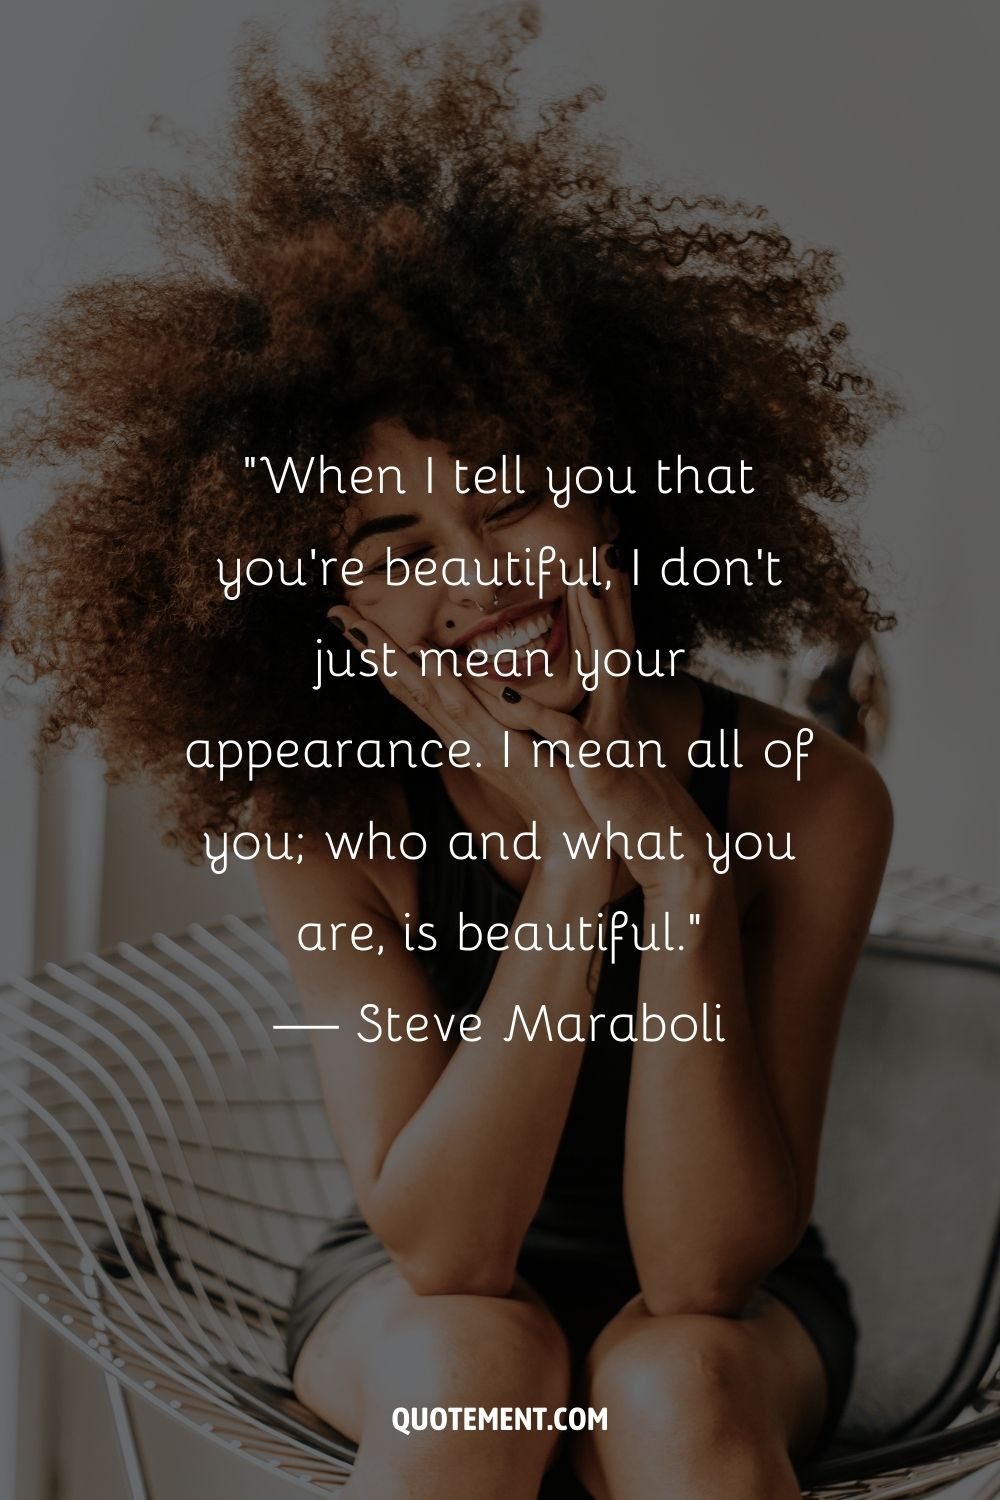 When I tell you that you're beautiful, I don't just mean your appearance. I mean all of you; who and what you are, is beautiful. — Steve Maraboli